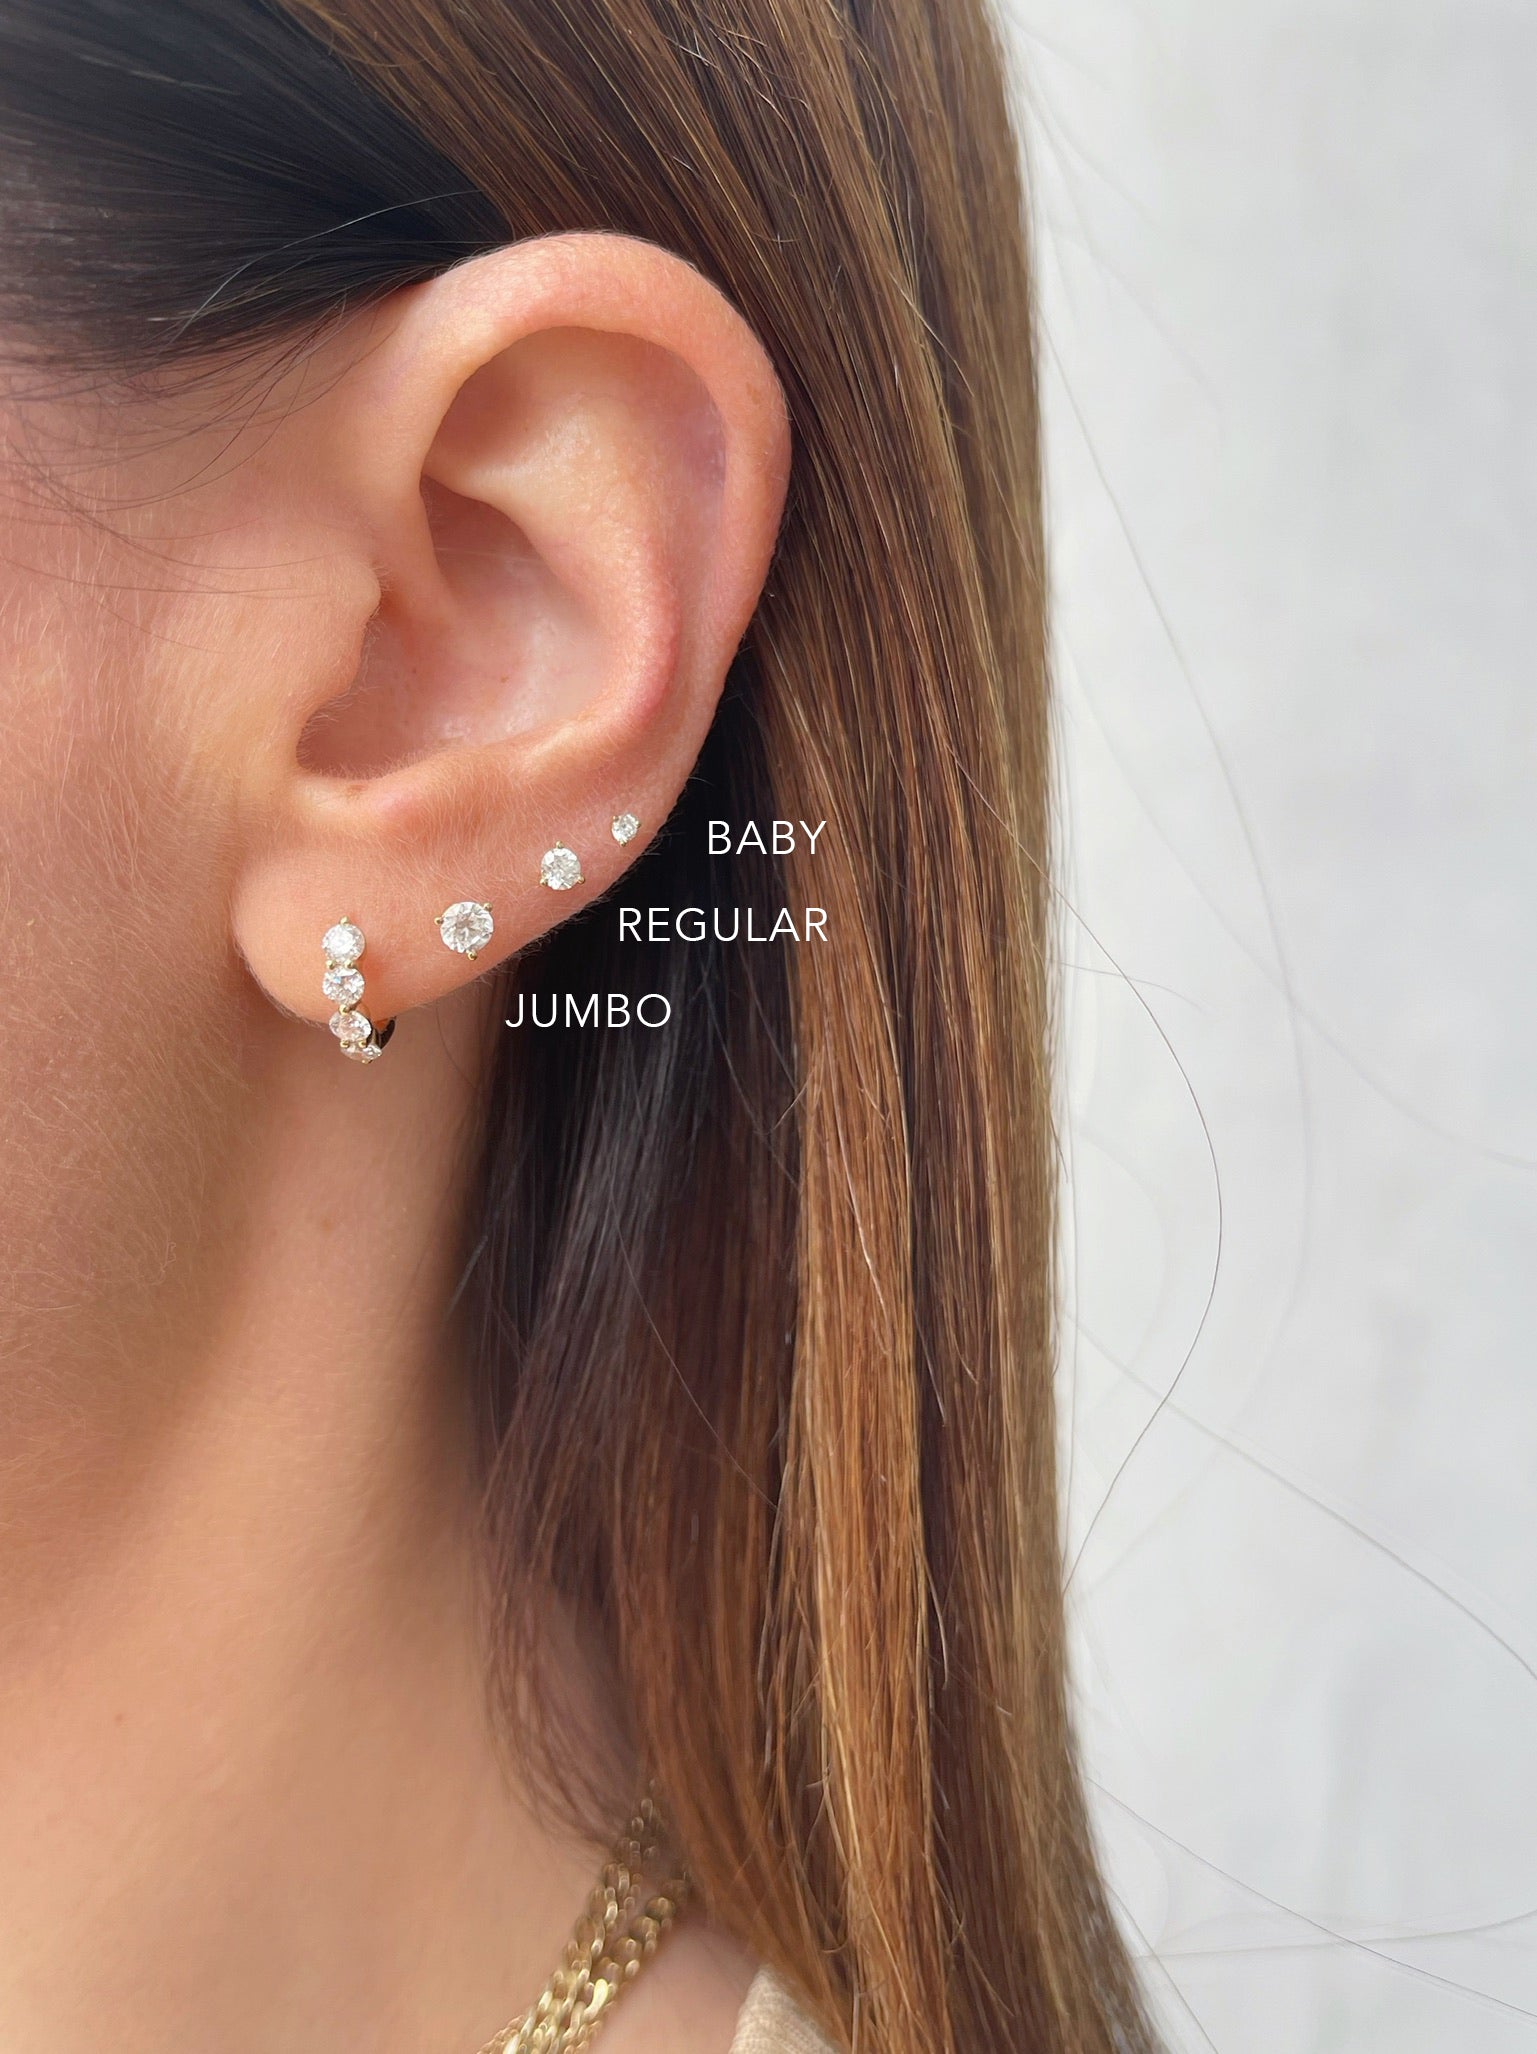 Solitaire Diamond Stud Earring in 14k yellow gold styled on ear with two studs and one huggie earring styled on ear of model diagram with jumbo regular and baby solitaire earring